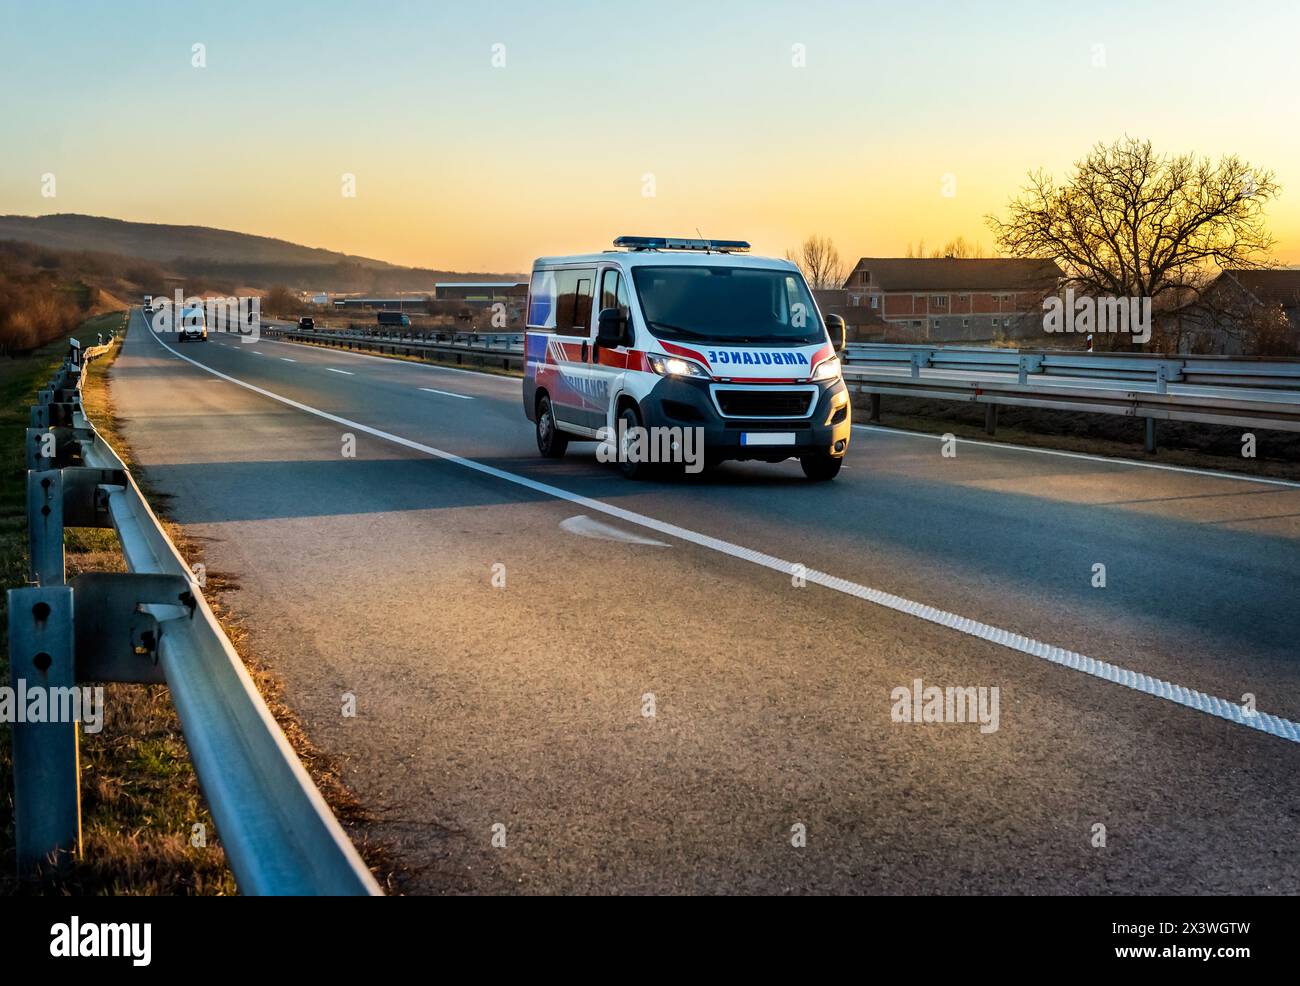 Ambulance van on highway at sunset. Ambulance car responding to the scene of an emergency. Stock Photo